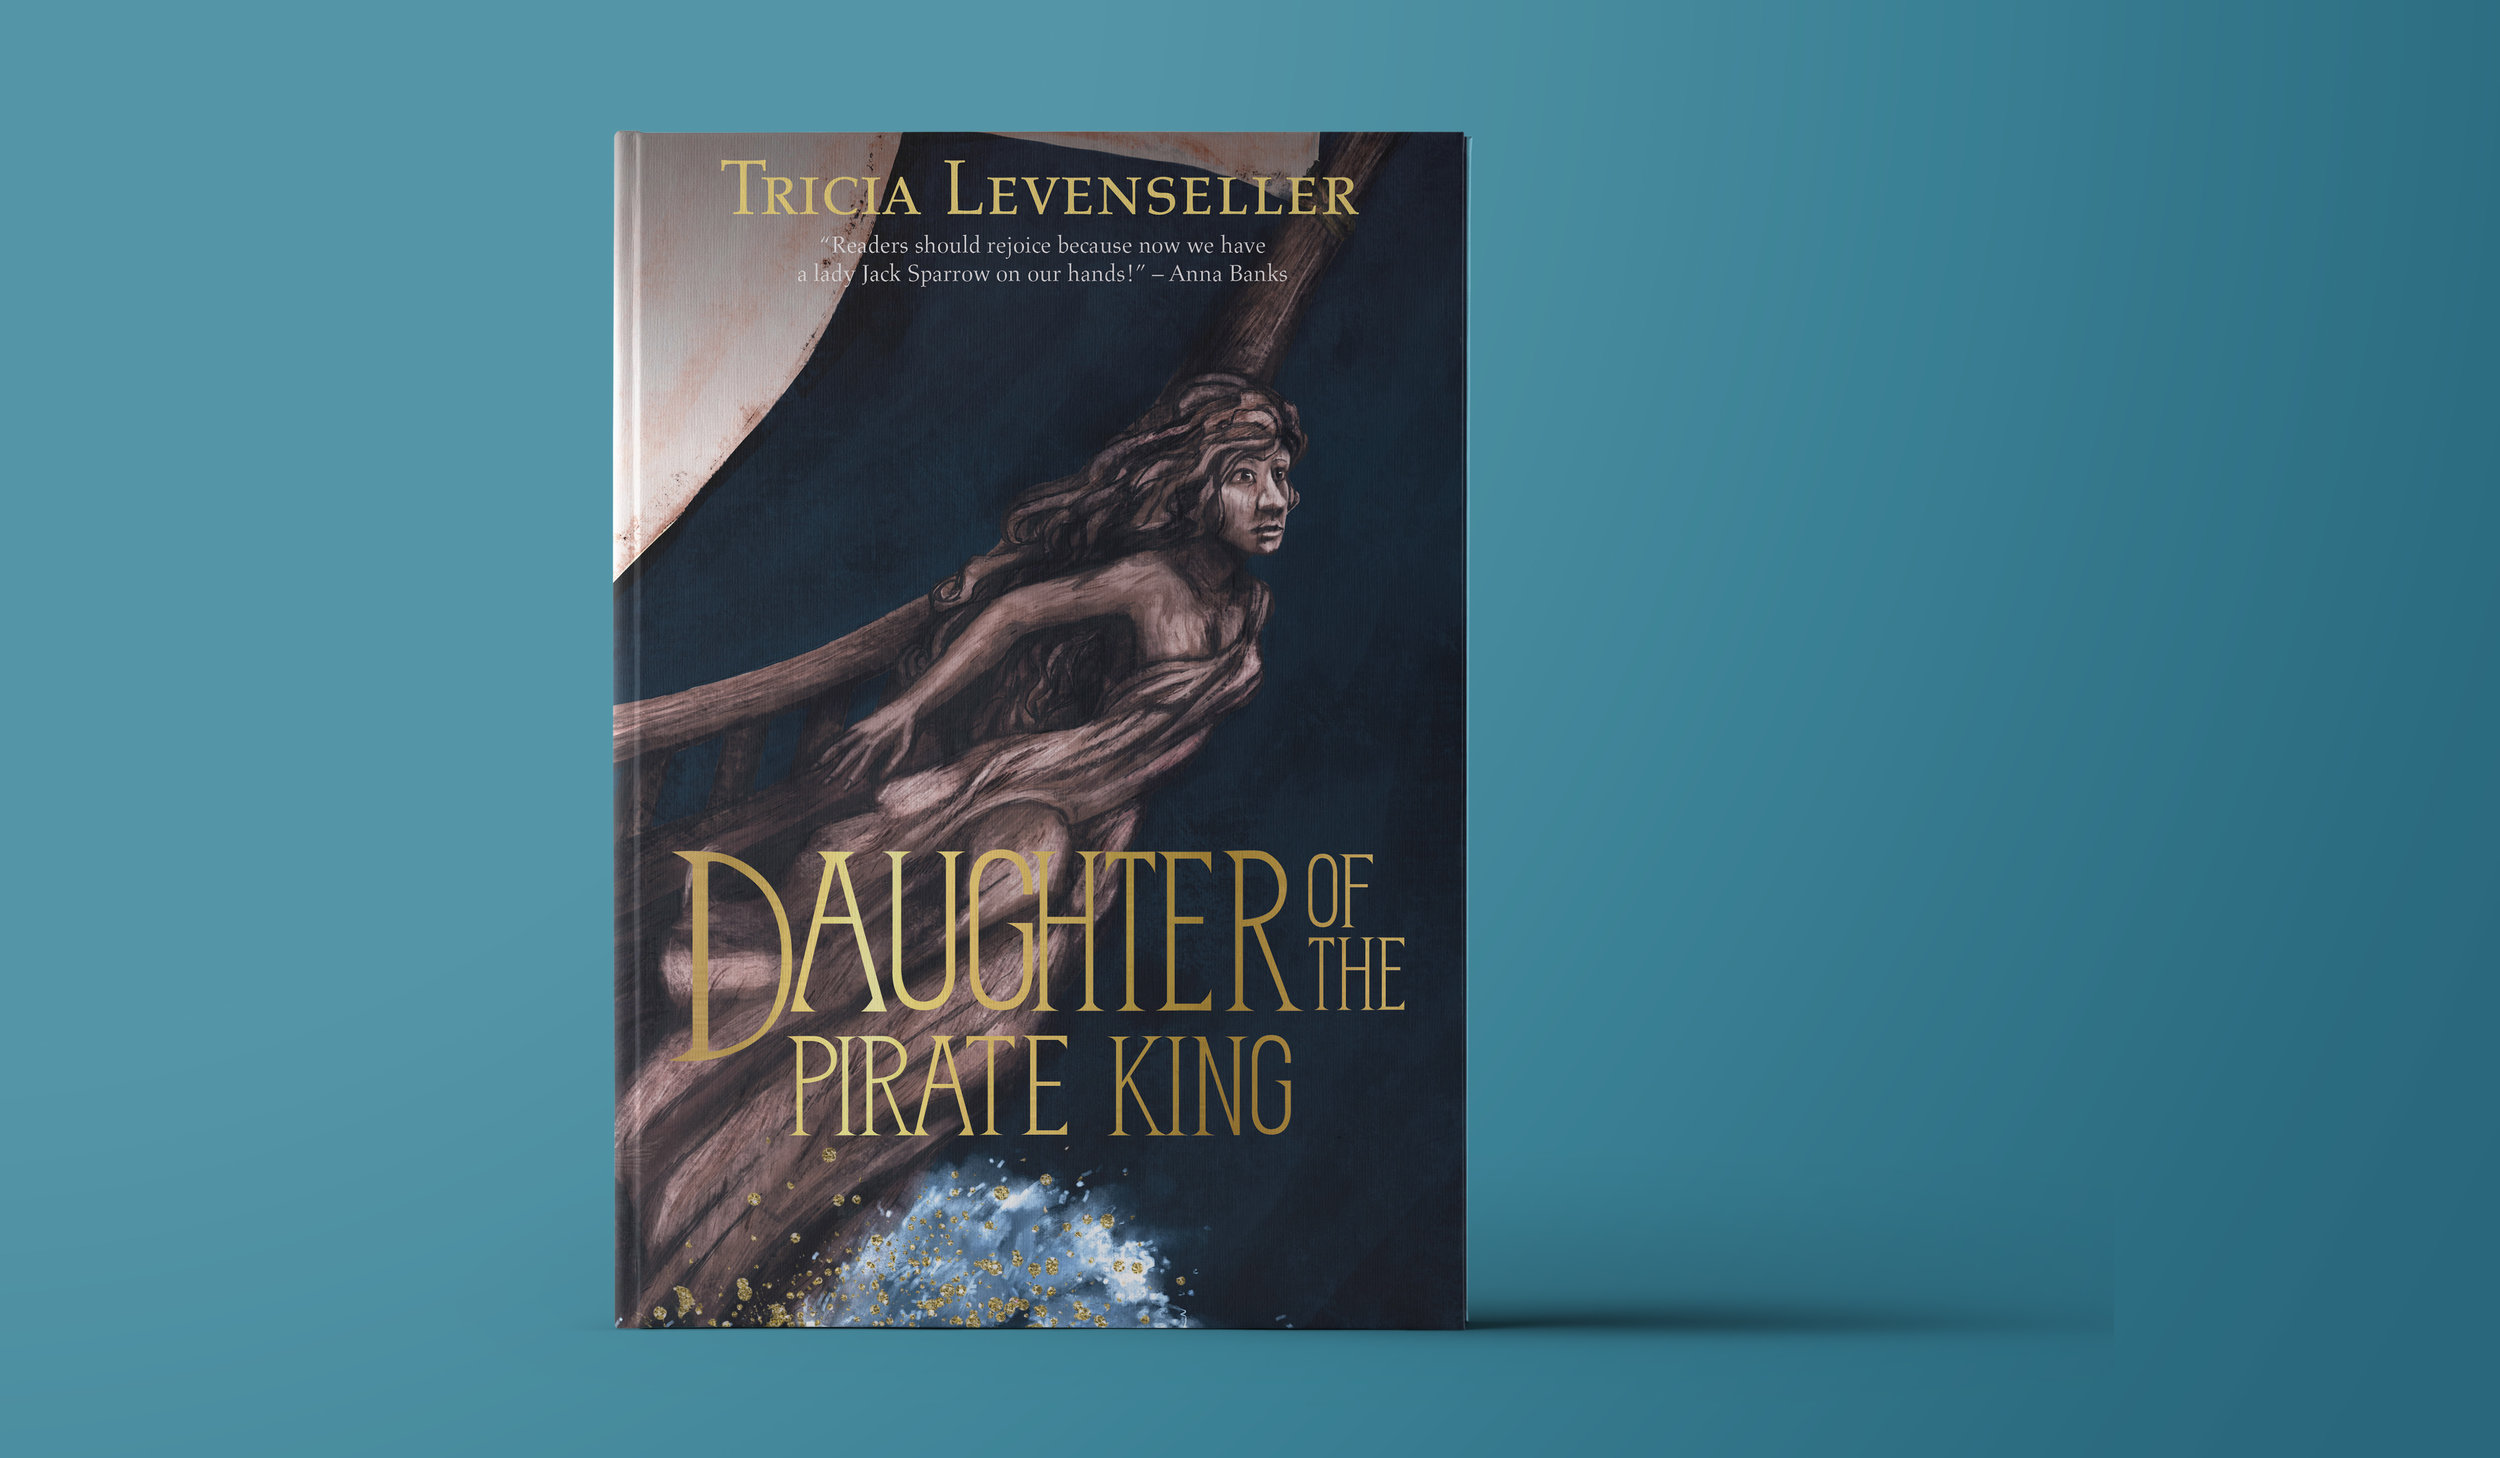 Book cover design – Daughter of the pirate king